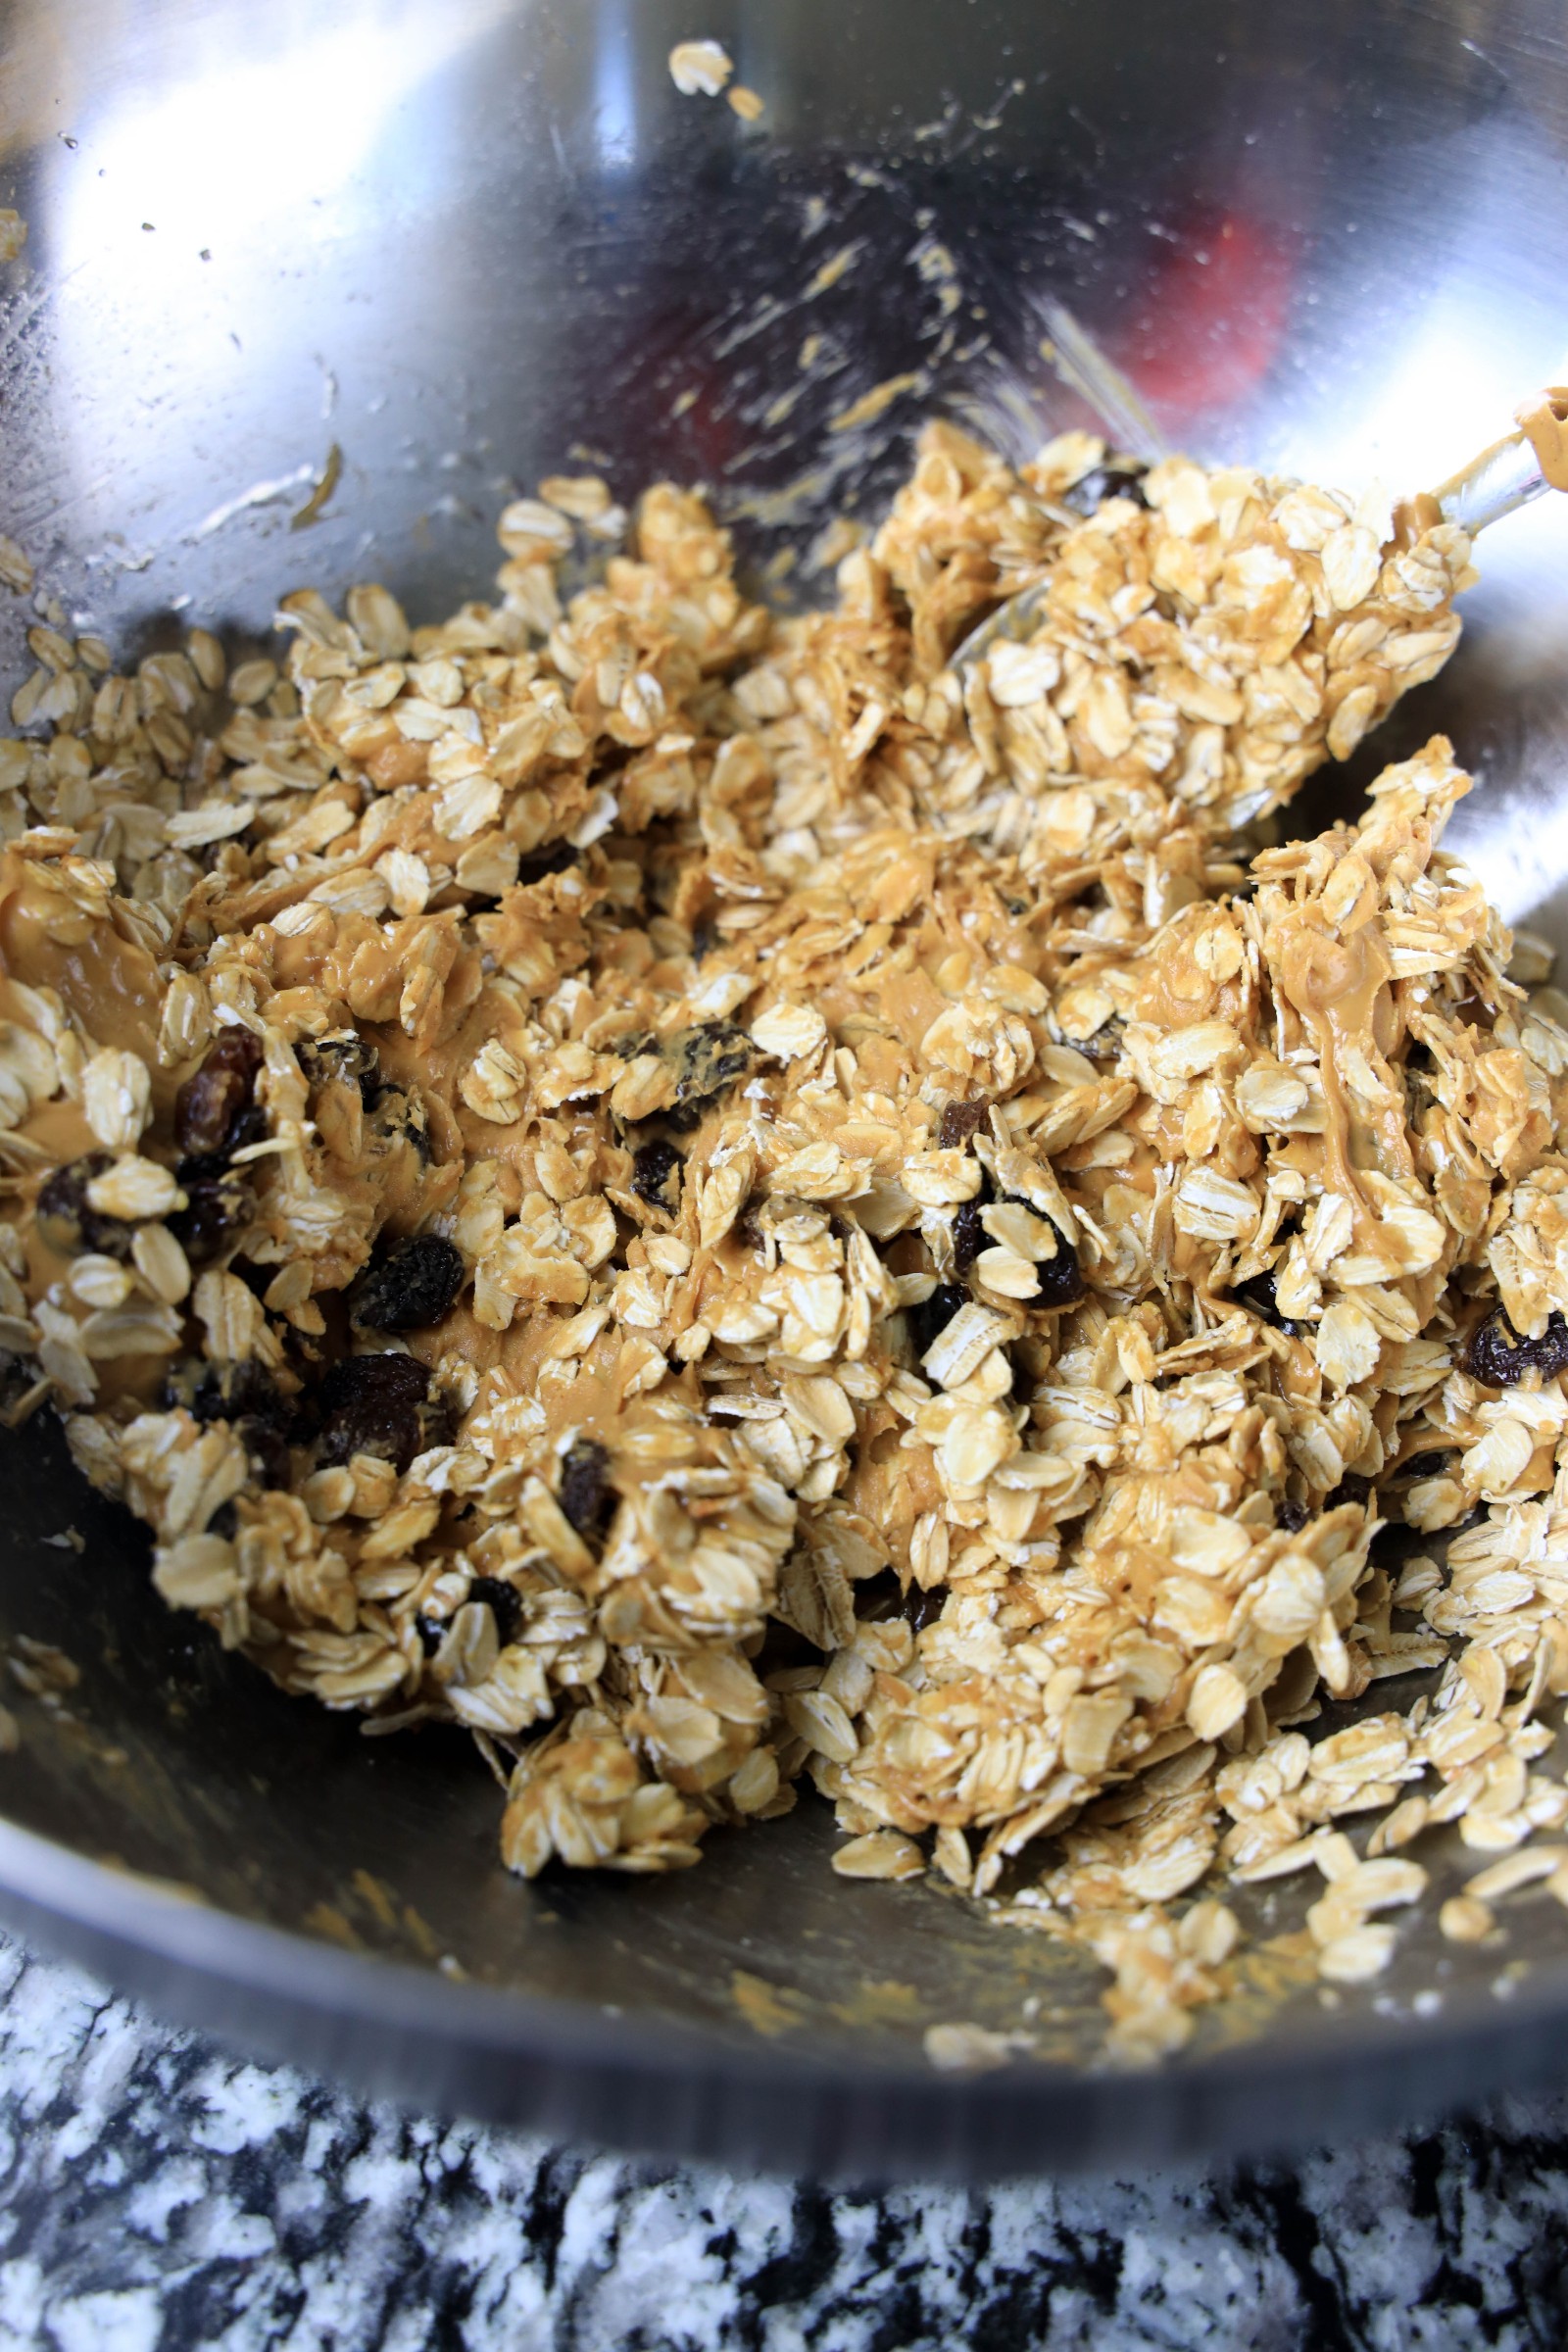 A stainless steel mixing bowl with oatmeal mixed with raisins, honey, and peanut butter.